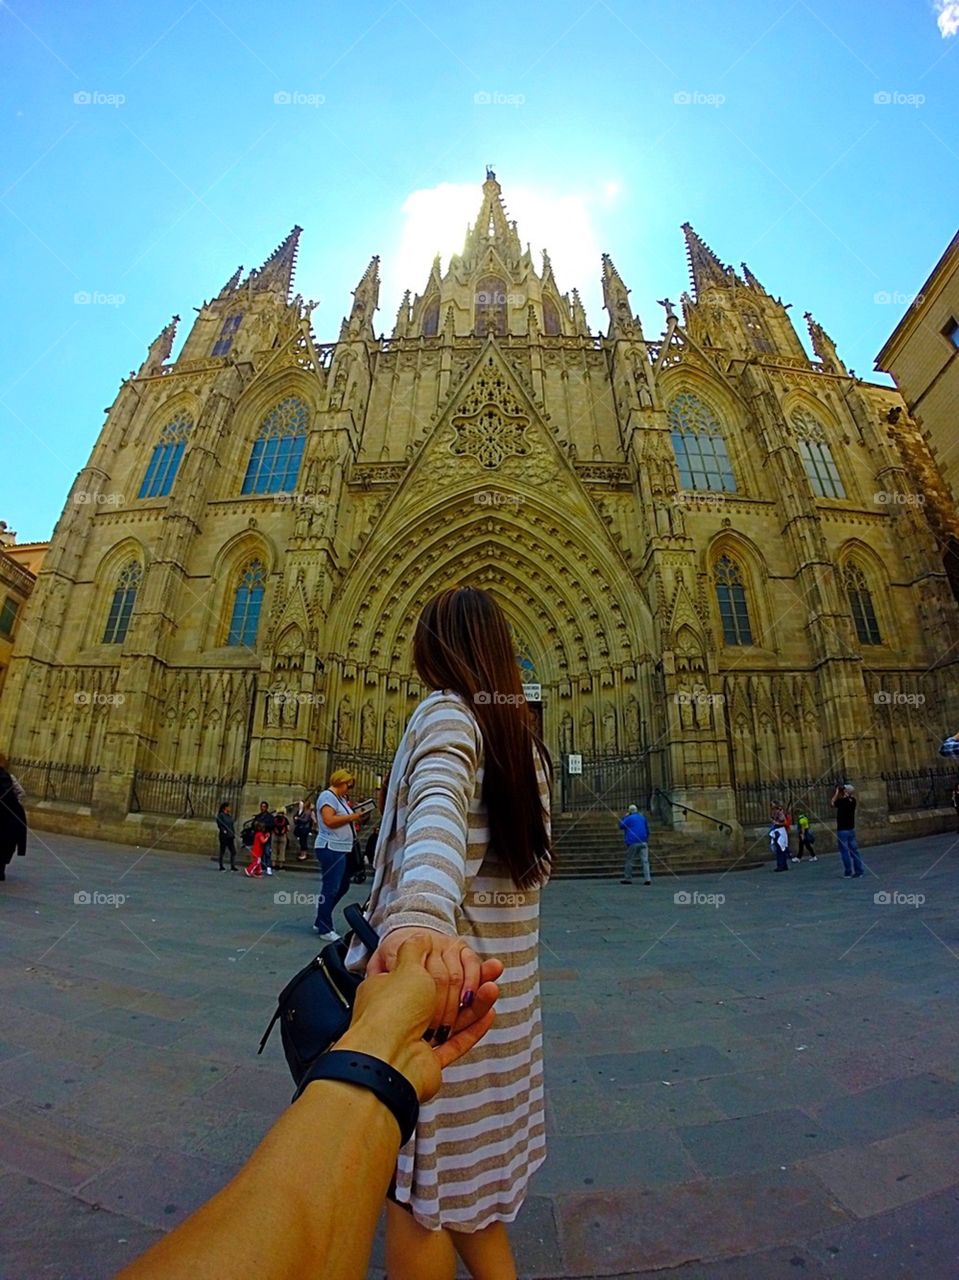 Follow me to Sagrista de la Cathedral in the Gothic Quarter of Barcelona, Spain